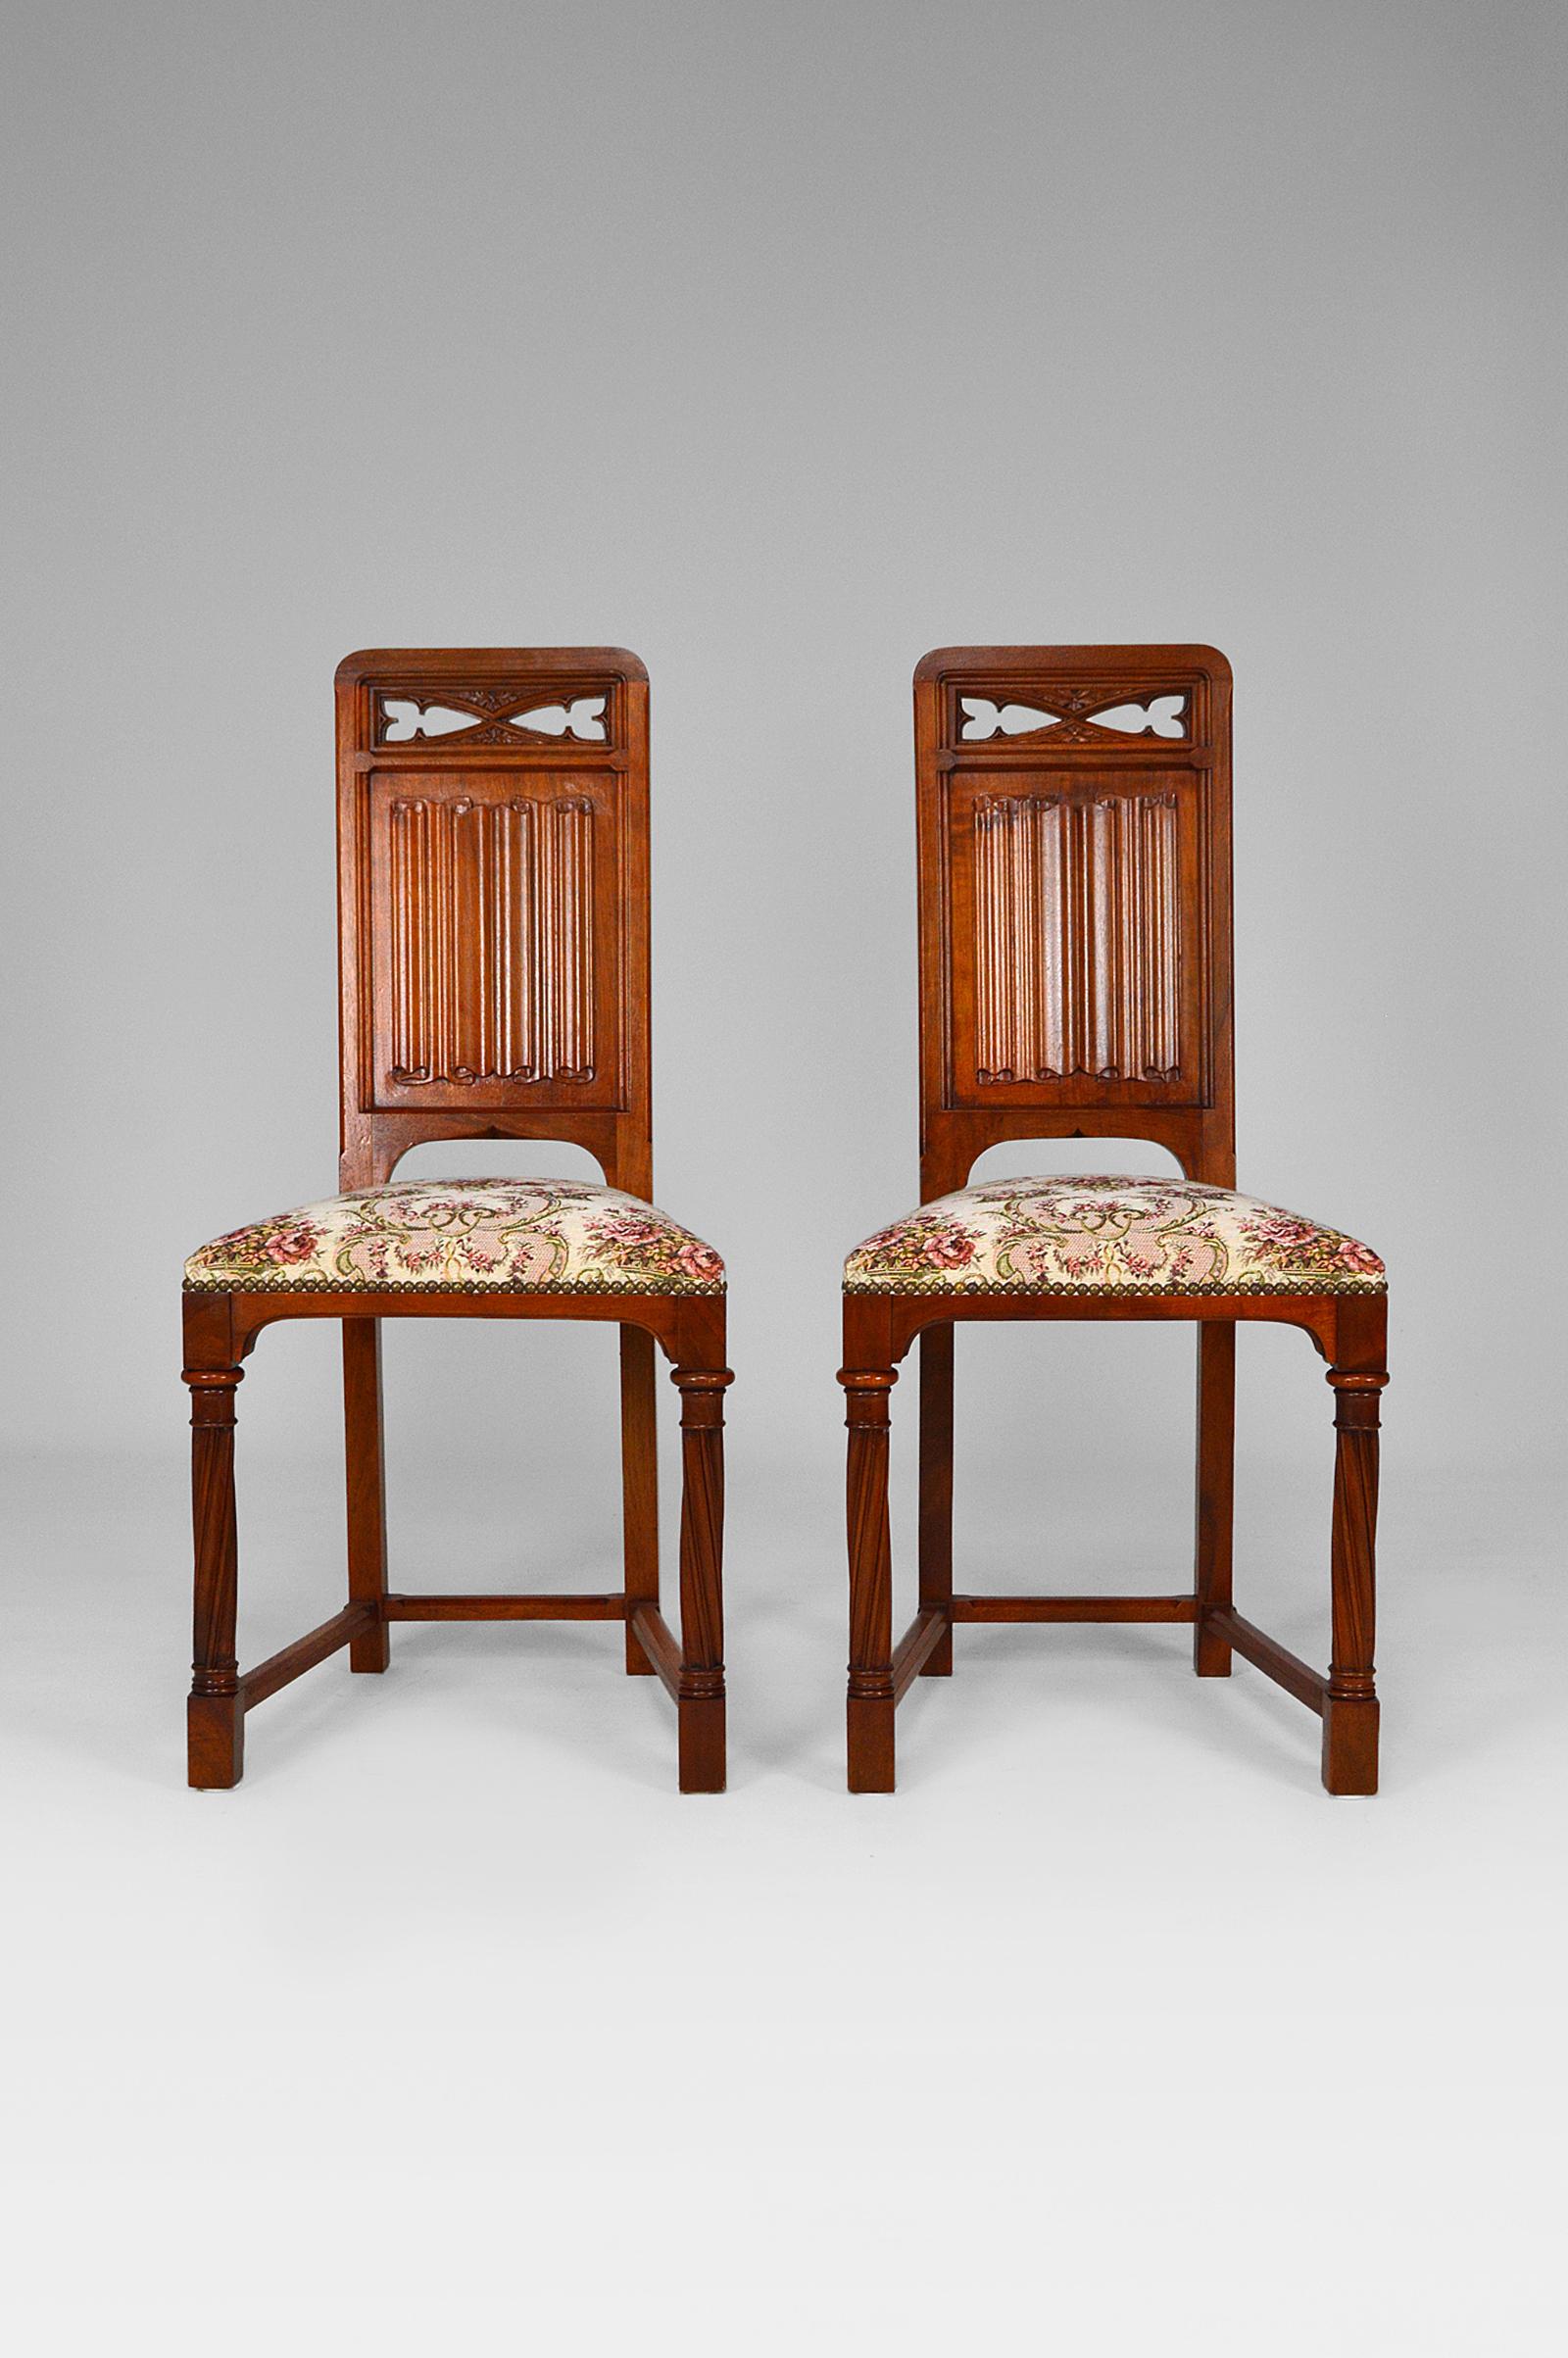 Pair of caquetoire / side chairs in walnut with carved scroll backs, and beige and pink floral patterned fabric.

Neo / Revival Gothic Renaissance style, France, around 1890.

Structure in perfect condition, seat fabrics in used